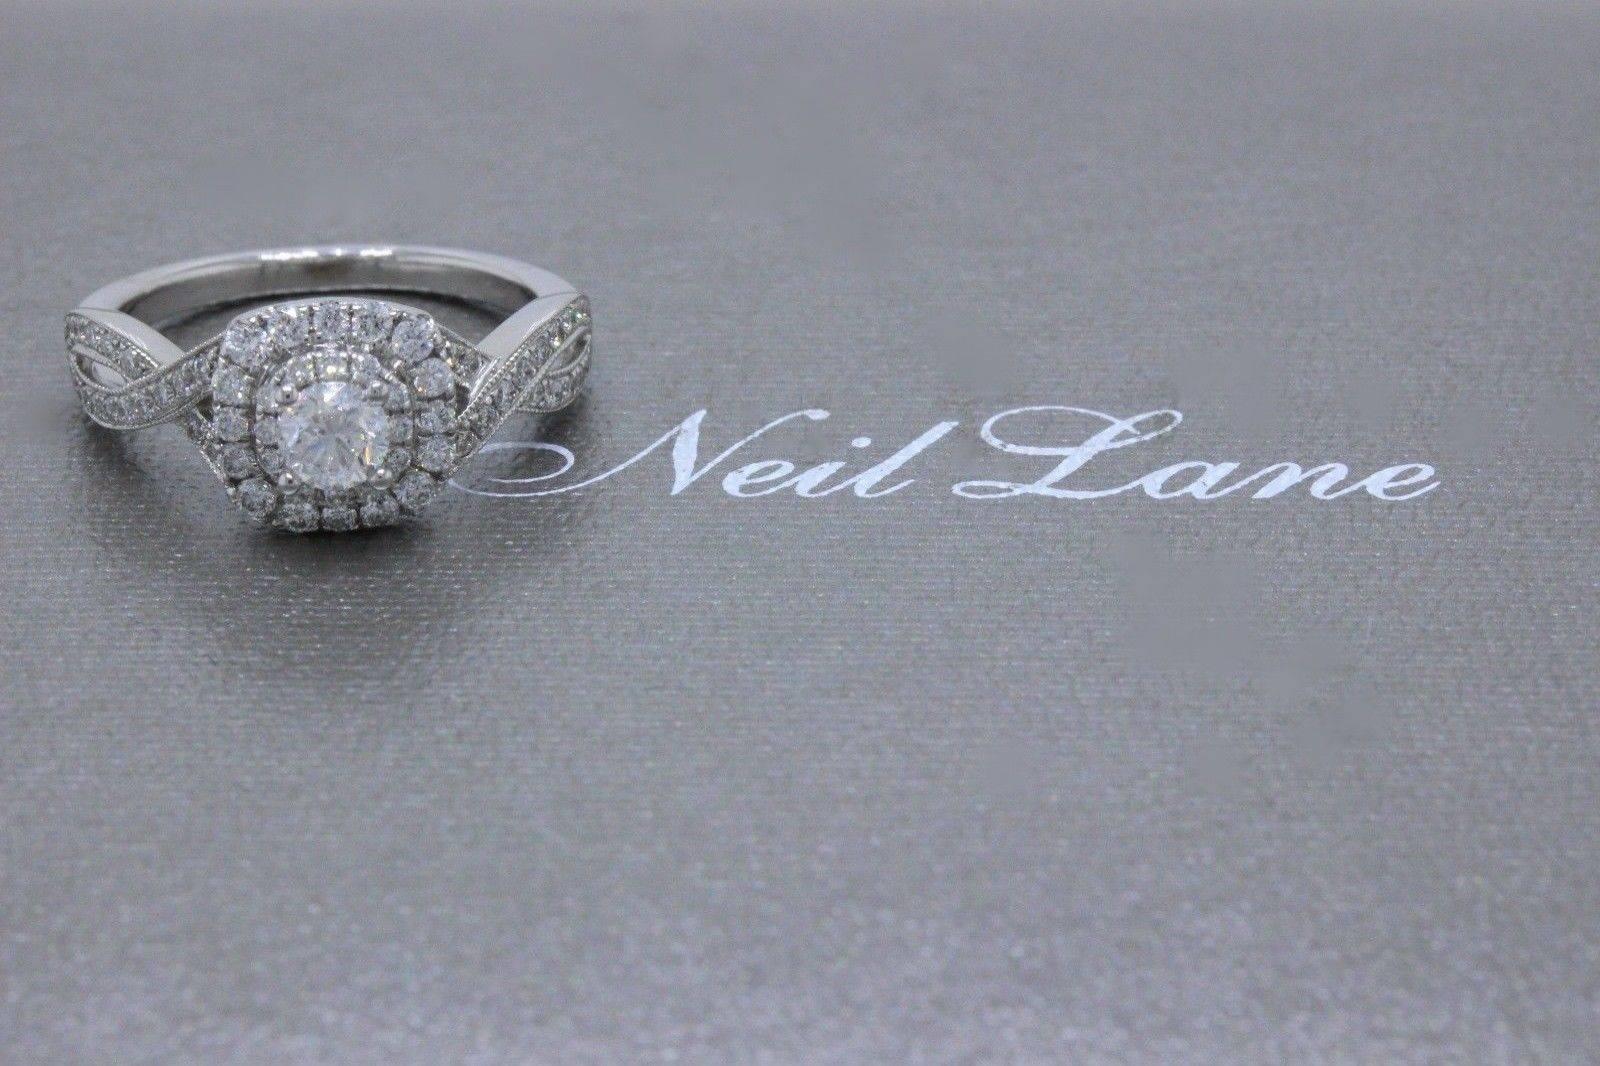 NEIL LANE BRIDAL
Style:  Double Halo Twist Band Engagement Ring
Sku Number:  #940258611
Metal:  14KT White Gold
Size:  5.5 - Sizable
Total Carat Weight:  3/4 TCW
Diamond Shape:  Round Diamond 0.33 CTS
Diamond Color & Clarity:  I / I1
Accent